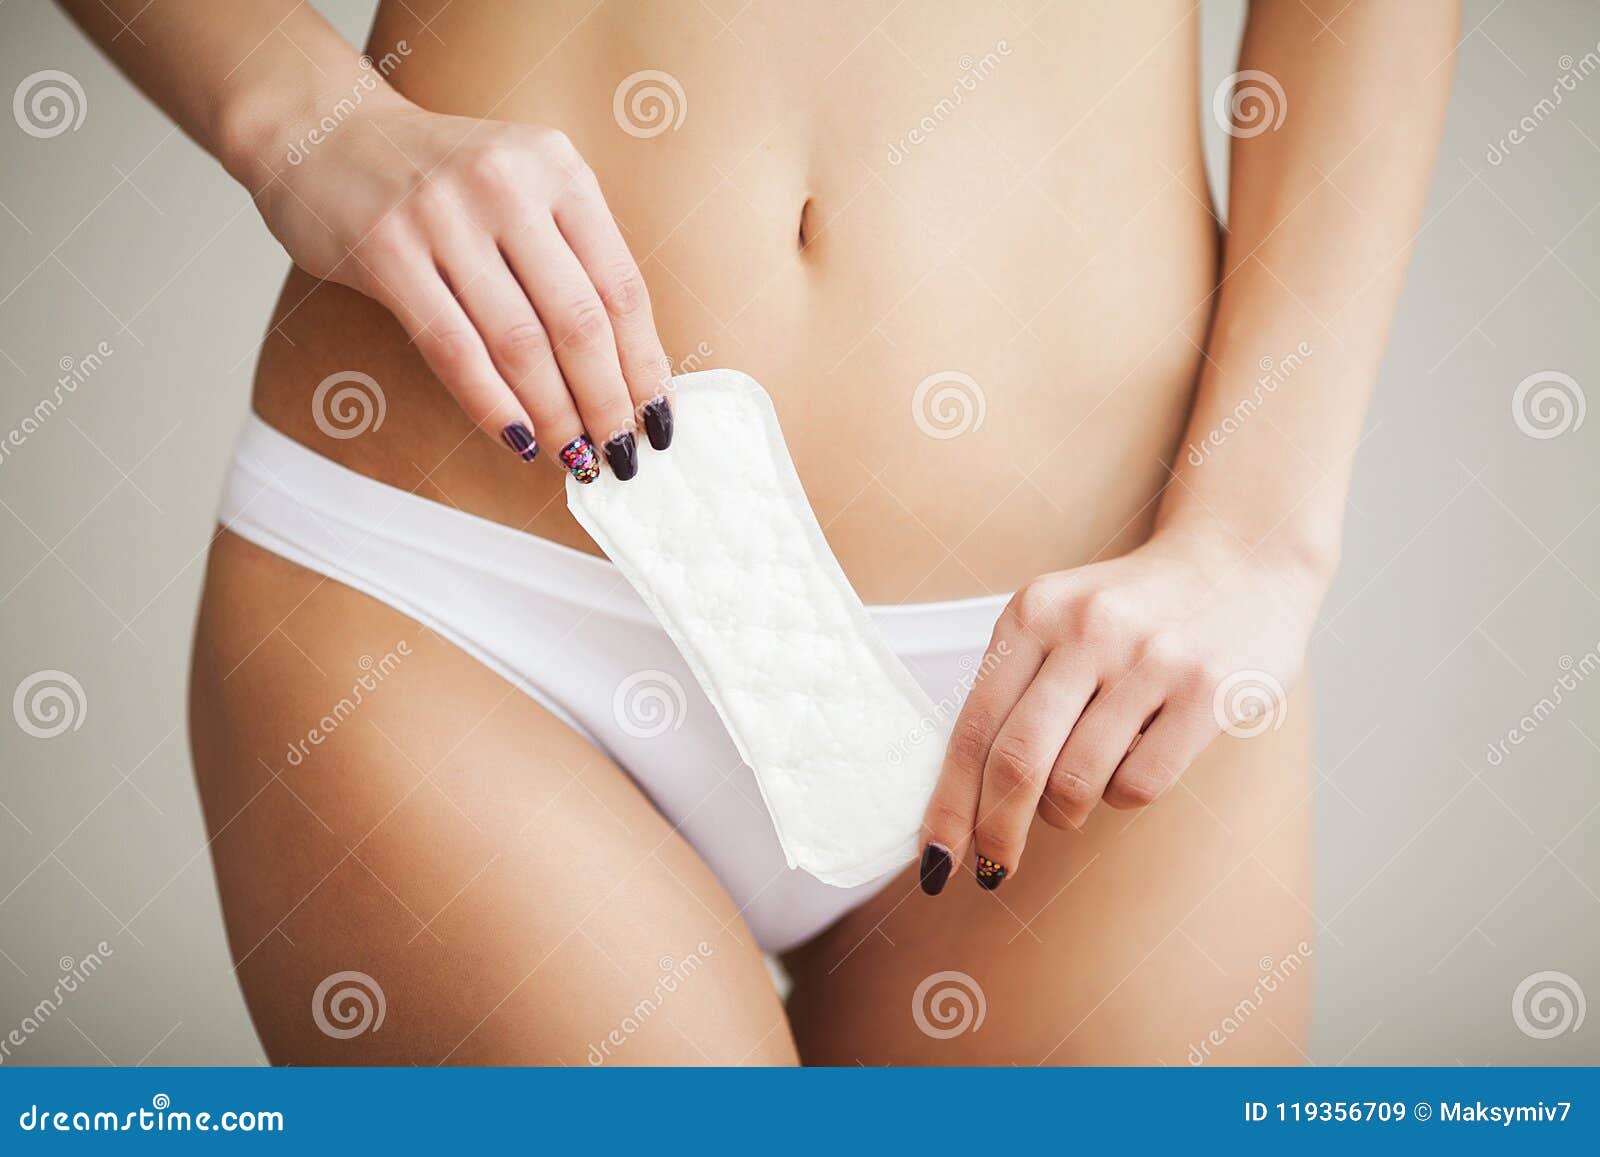 Female Hygiene. Closeup of Beautiful Woman with Fit Slim Body in Stock  Image - Image of lady, intimate: 119356709